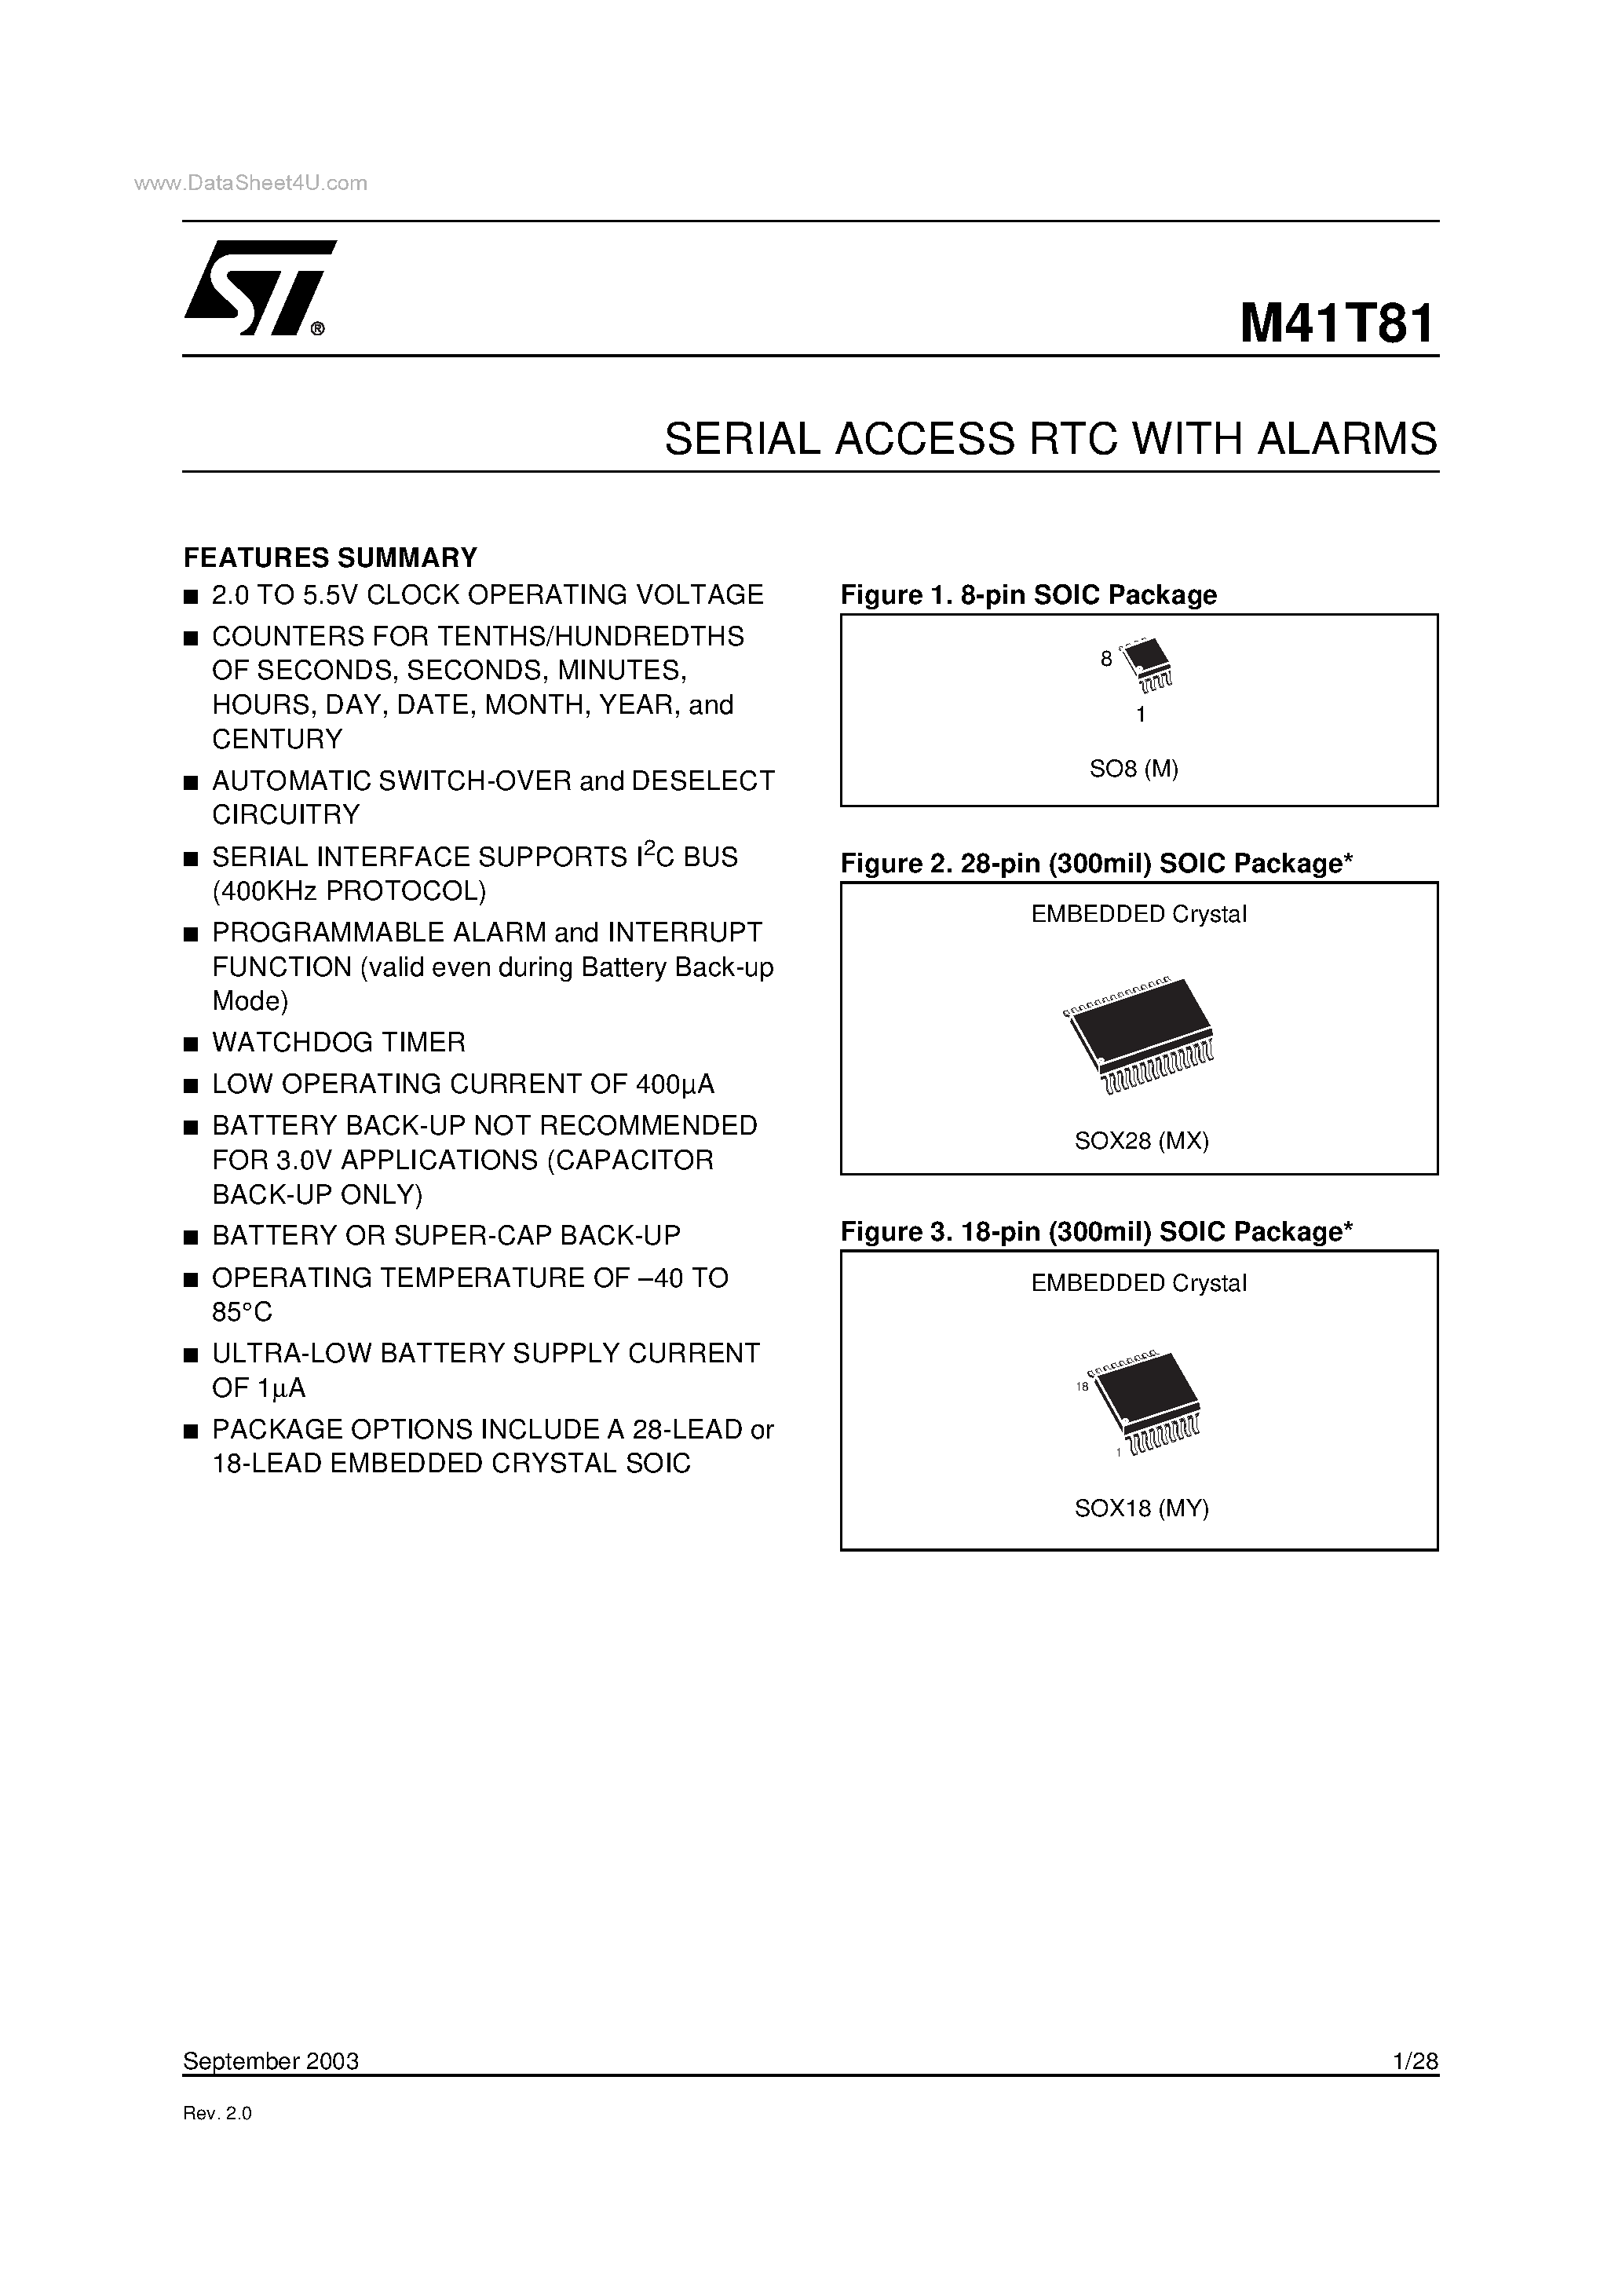 Datasheet M41T81M6 - SERIAL ACCESS RTC WITH ALARMS page 1